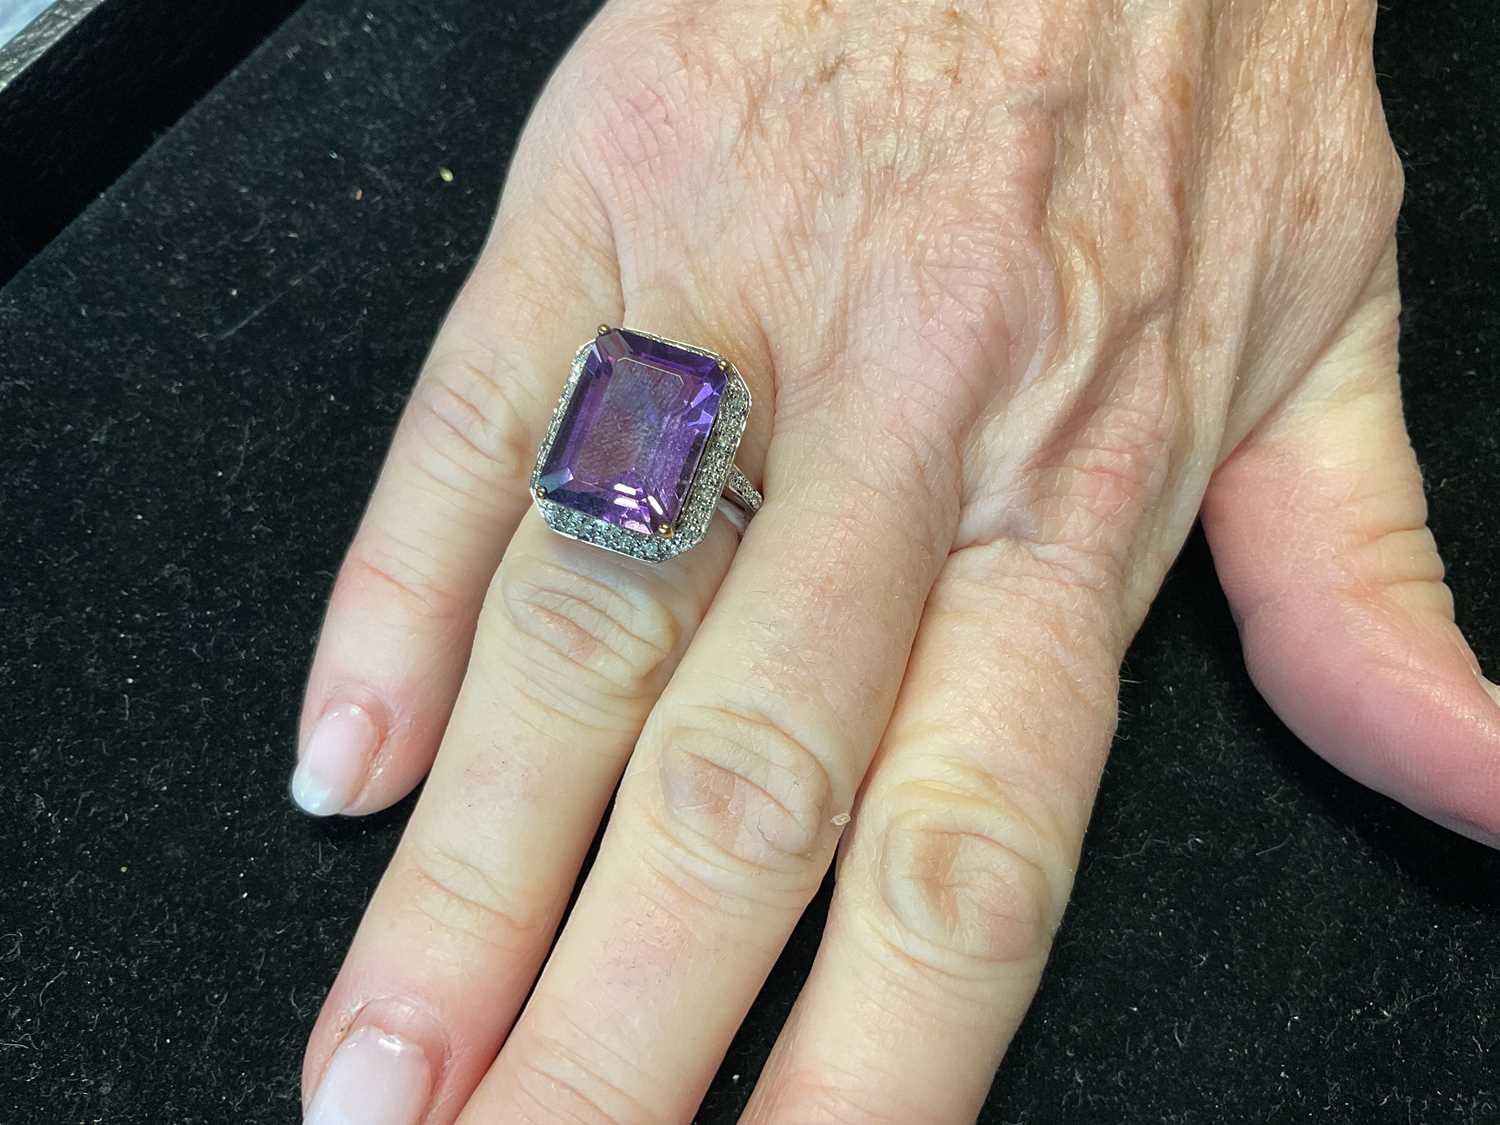 A 9ct yellow gold ring set with large emerald cut amethyst, size N 1/2, approx. 4.78g. - Image 3 of 3